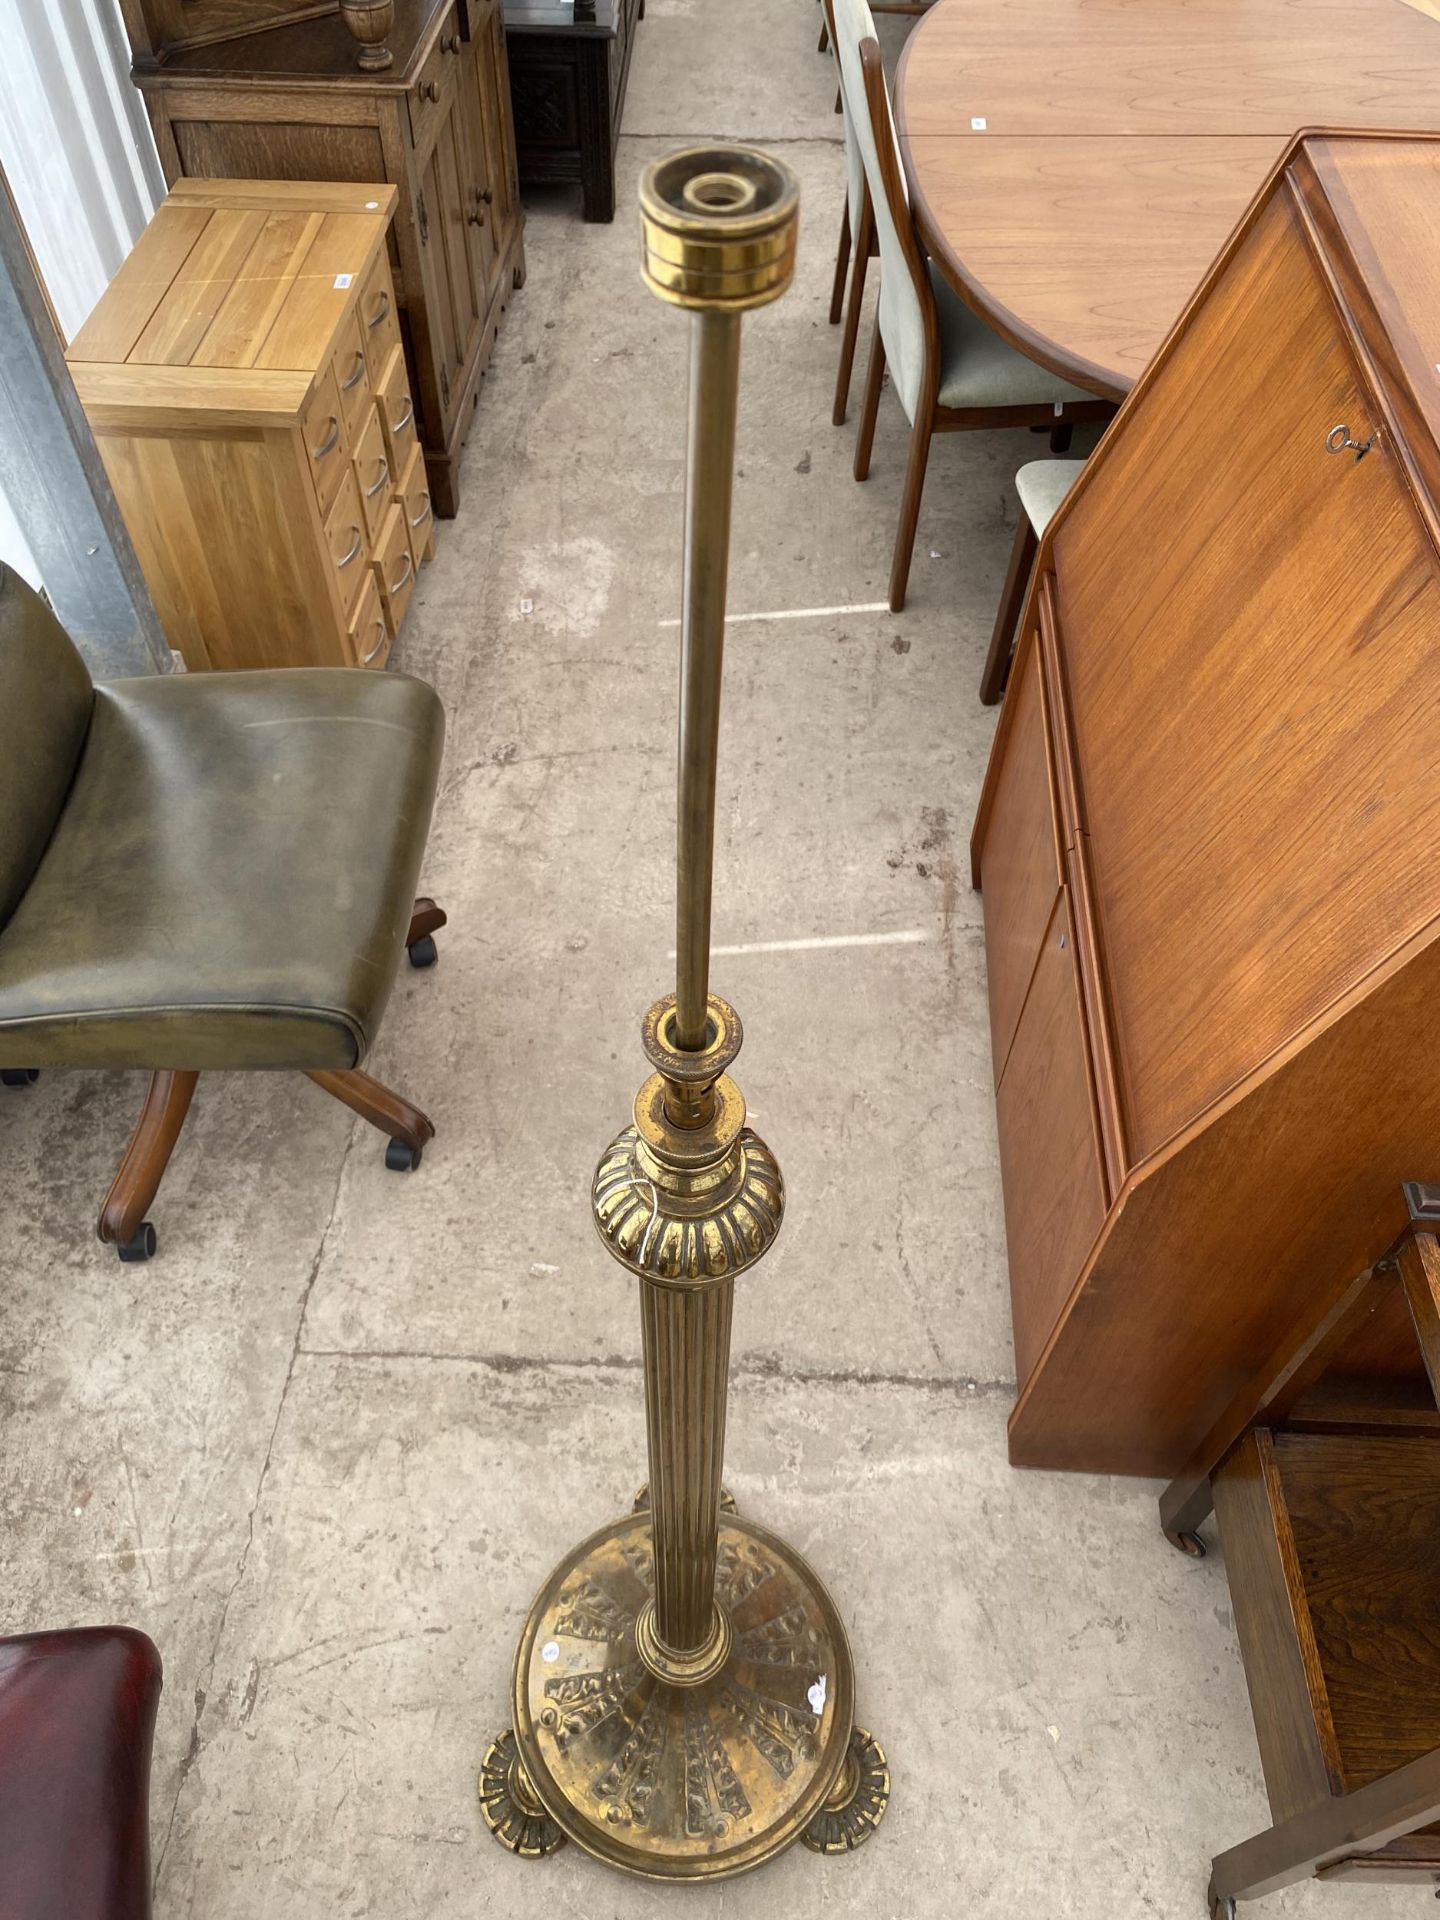 AN EARLY 20TH CENTURY BRASS ADJUSTABLE LAMP STANDARD WITH FLORAL DECORATED BASE AND GREEK KEY - Image 2 of 4